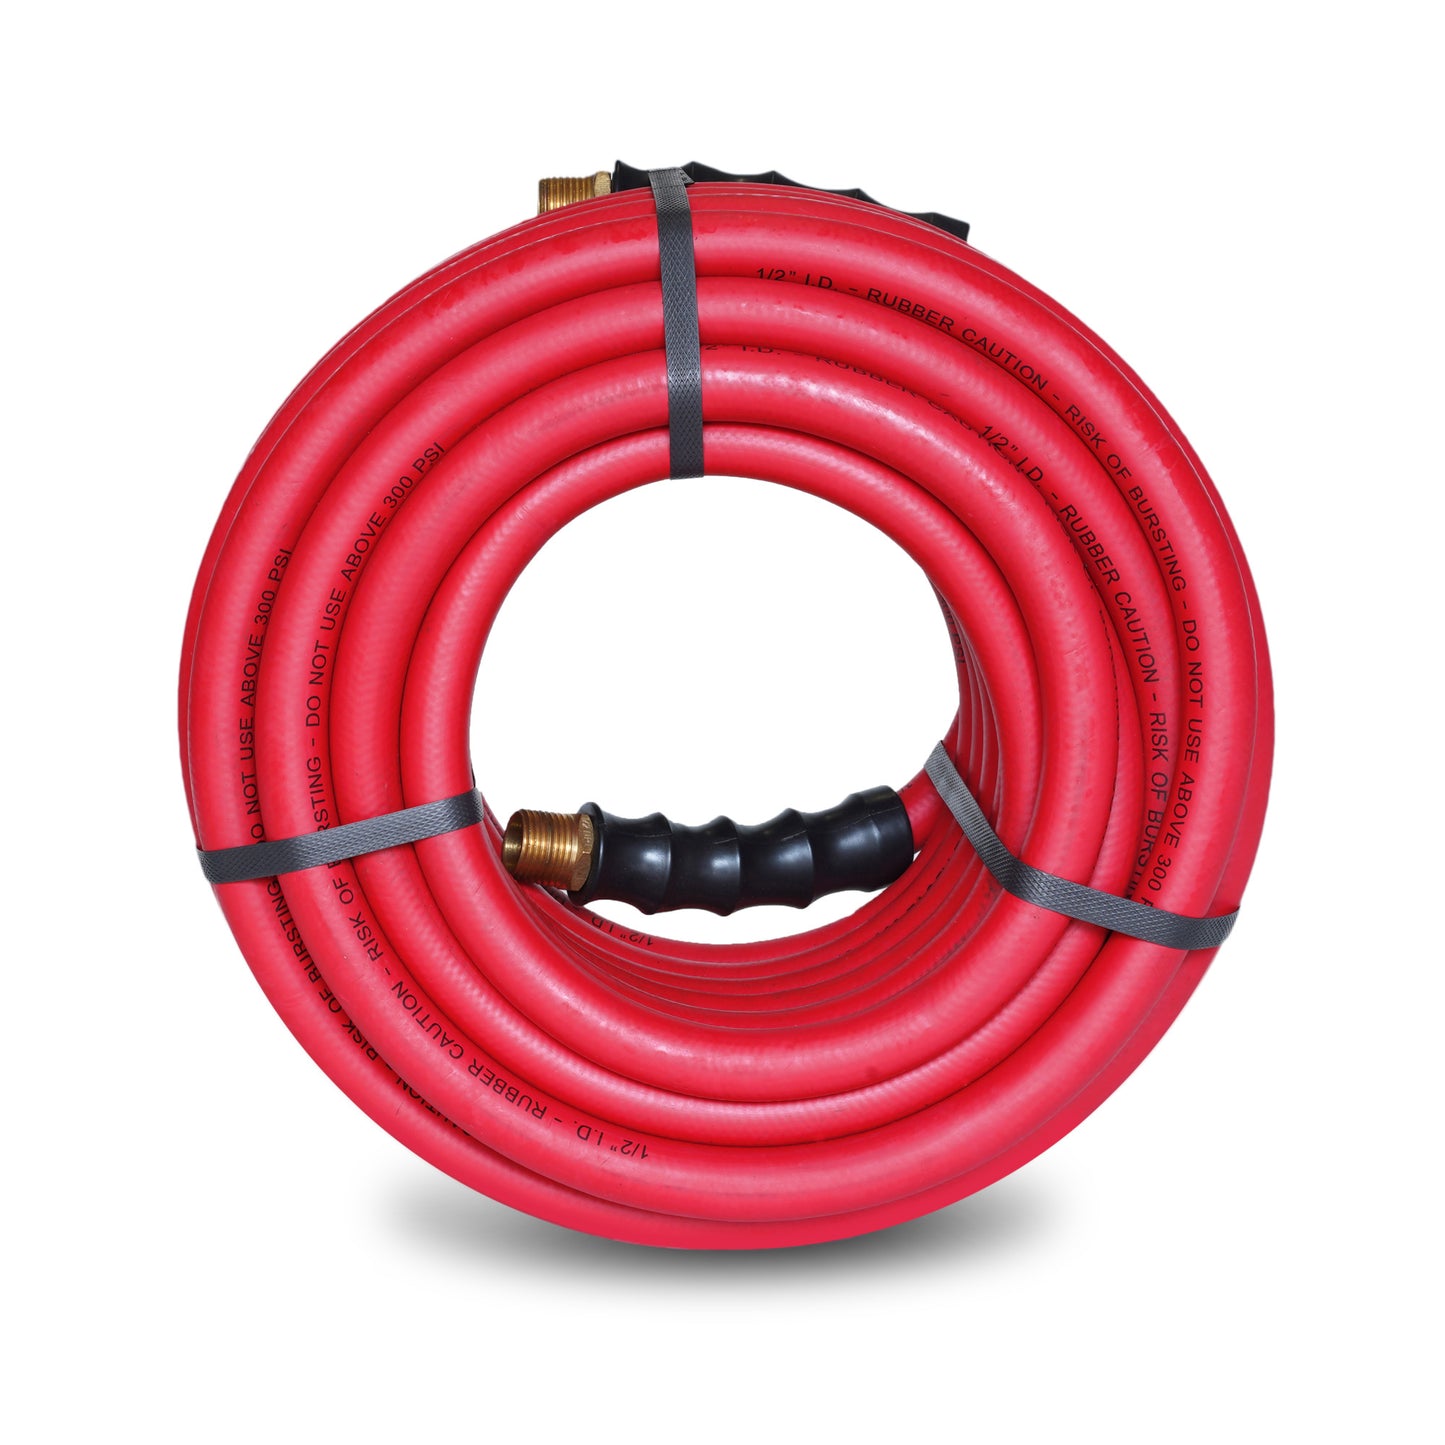 Steelman 50-Ft Rubber 1/2-In Id Replacement Hose, 1/2-In Npt